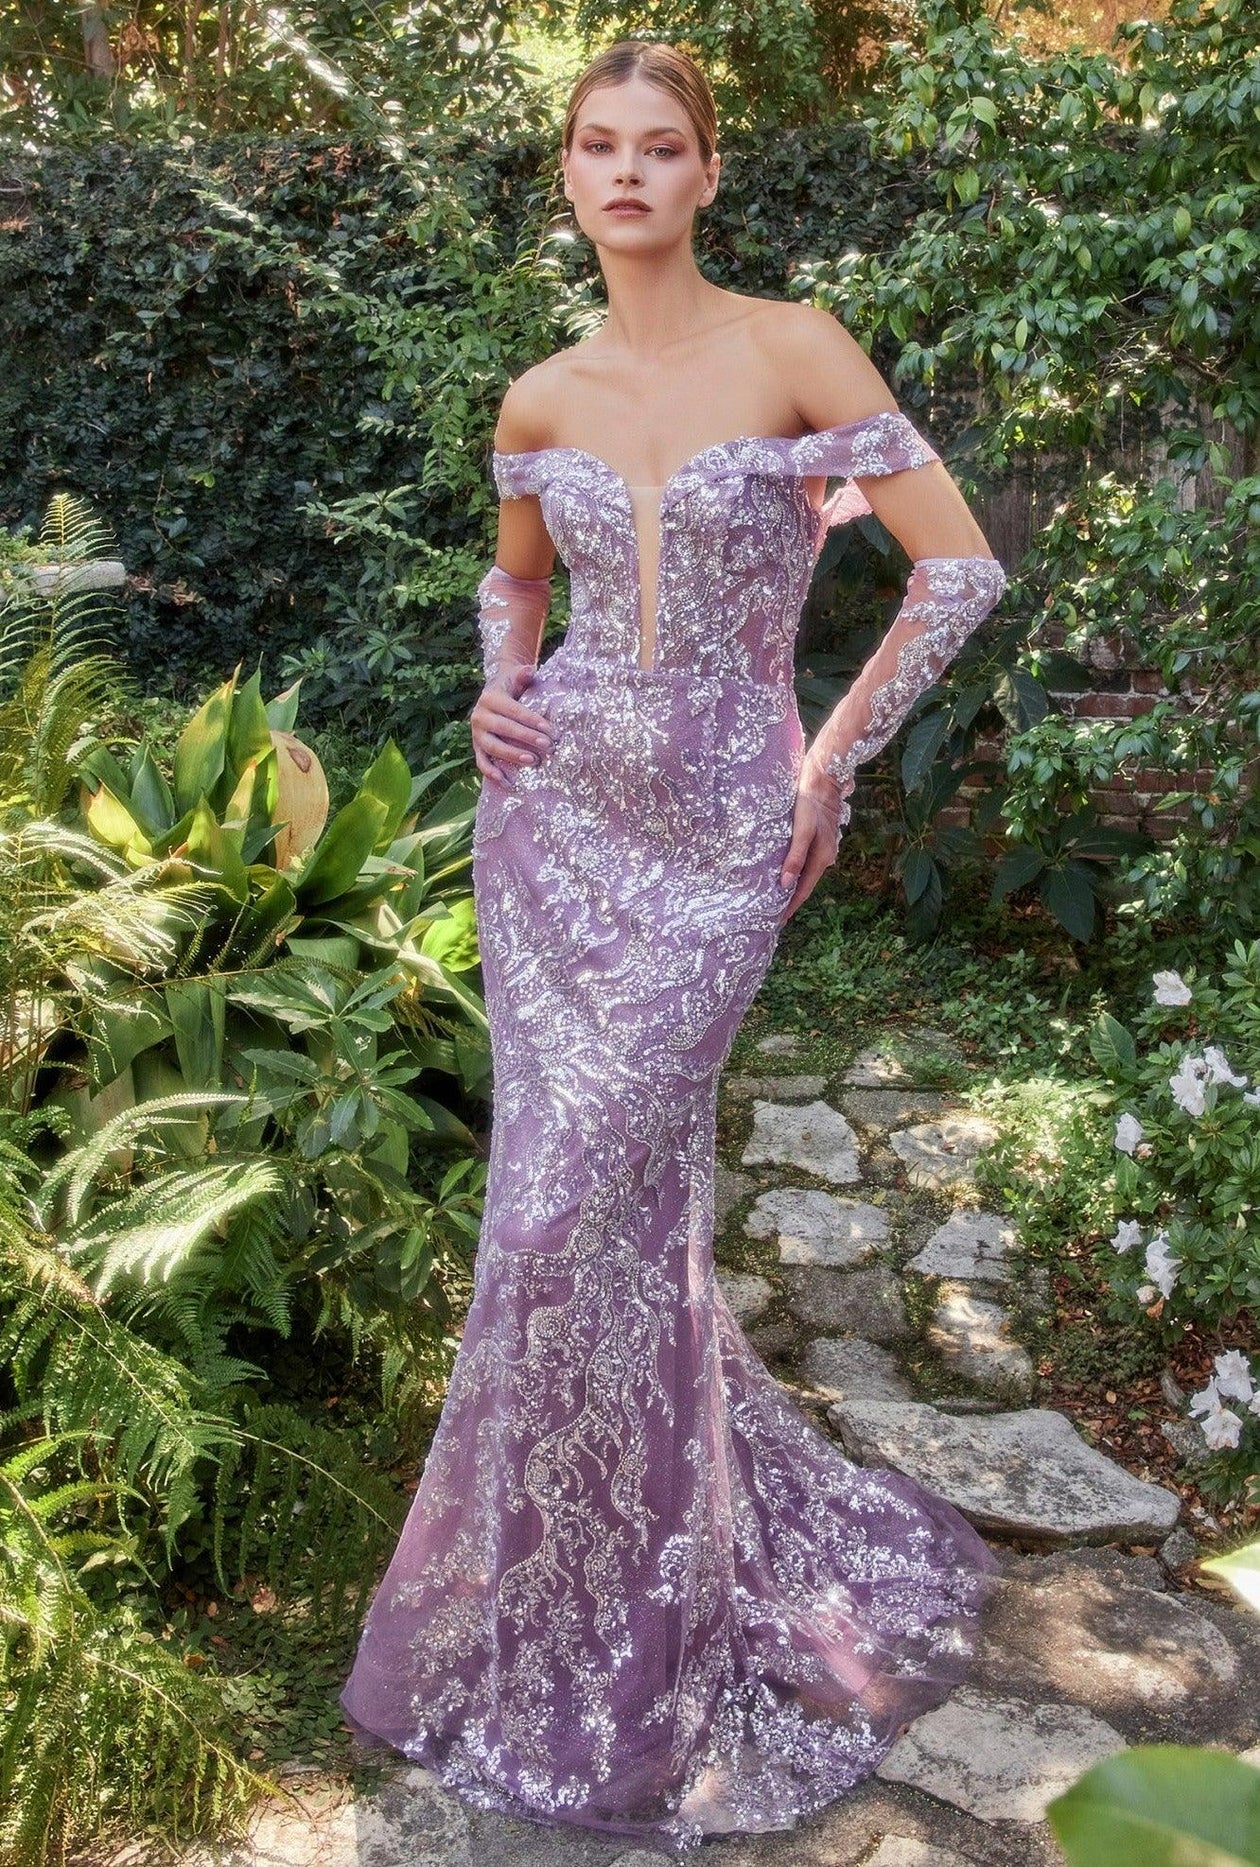 Long Sleeve Off Shoulder Beaded Corset Gown by Andrea & Leo